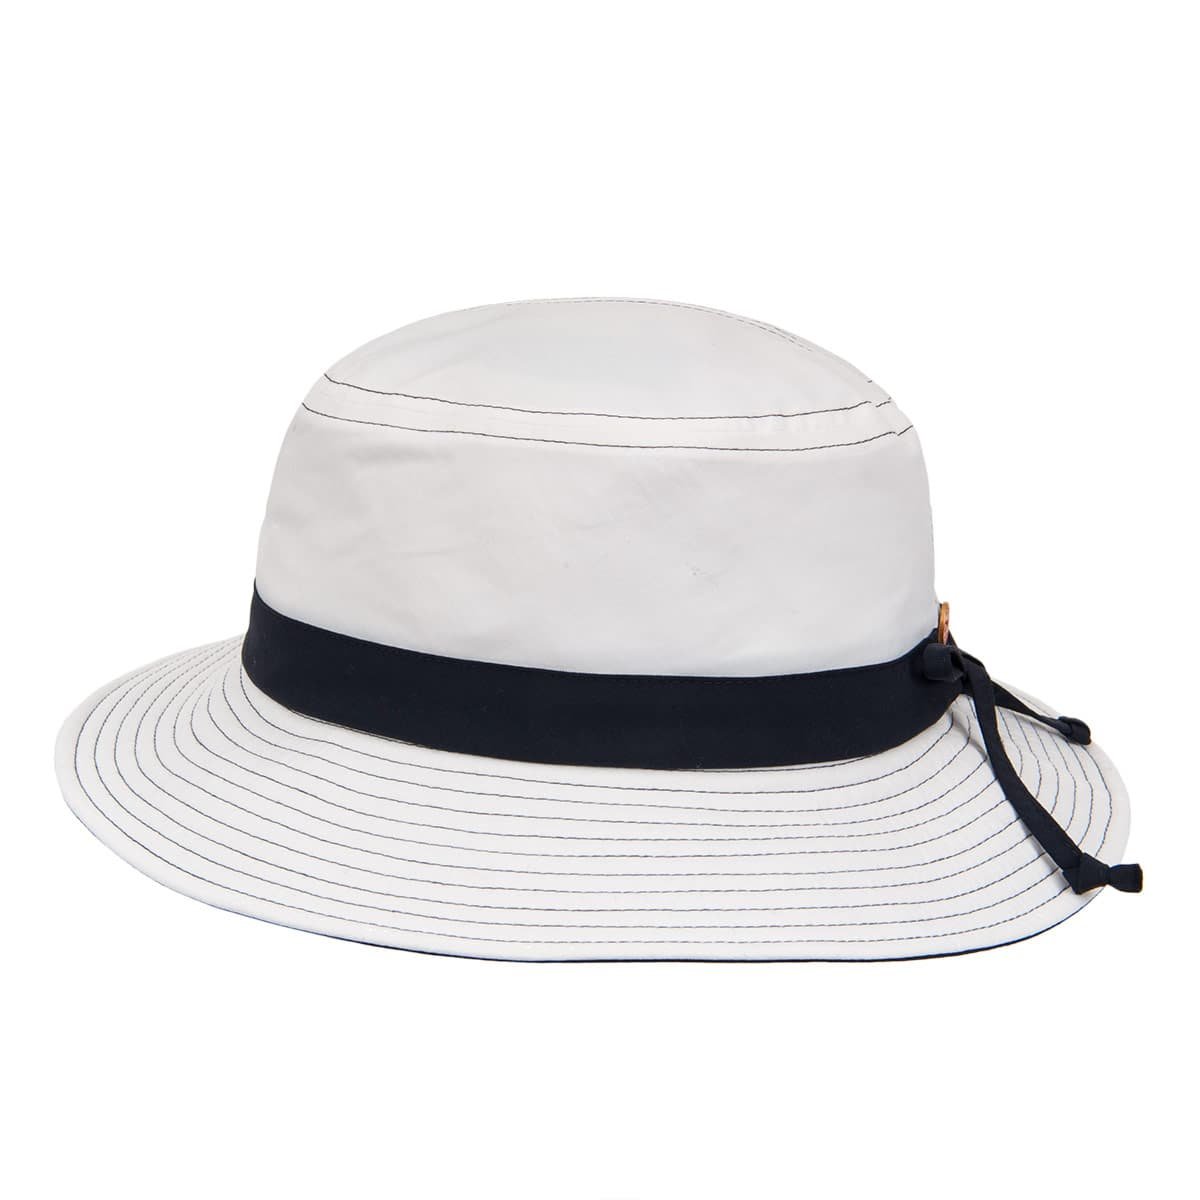 MAYSER  Anni fabric sunhat for women --> Online Hatshop for hats